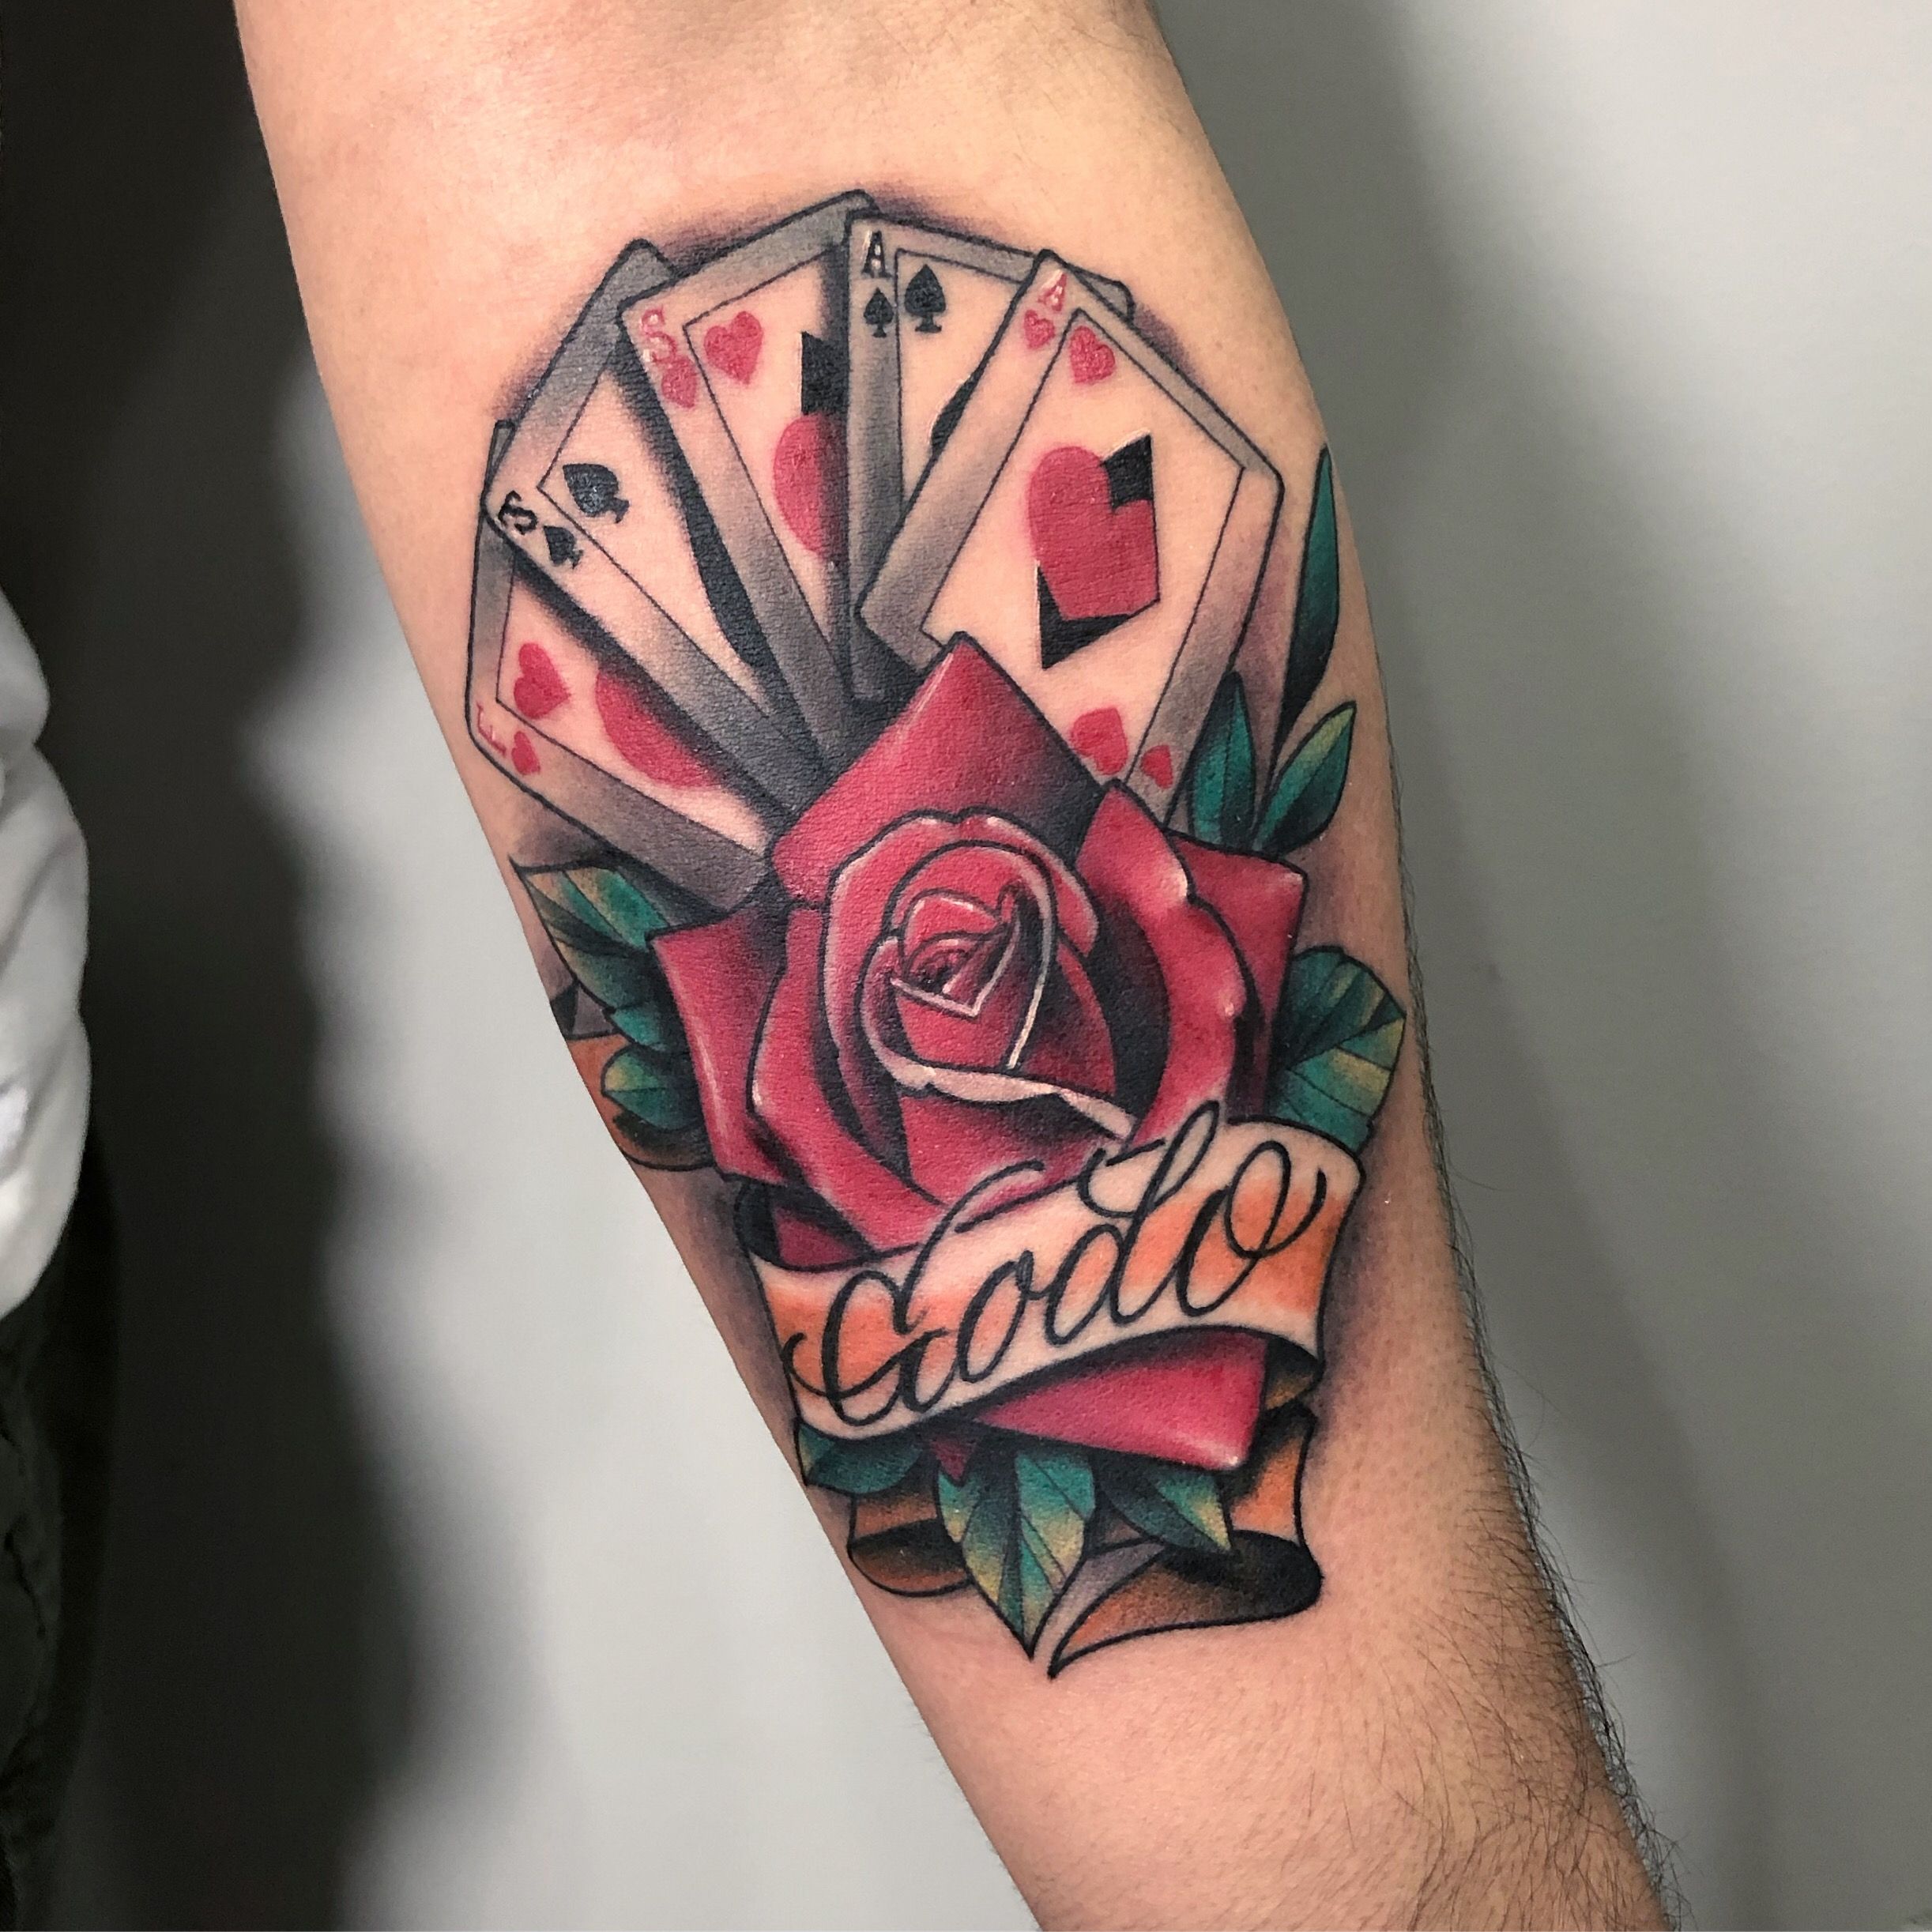 Tattoo Shops Near Me Bridgeport Ct - Tatto Pictures